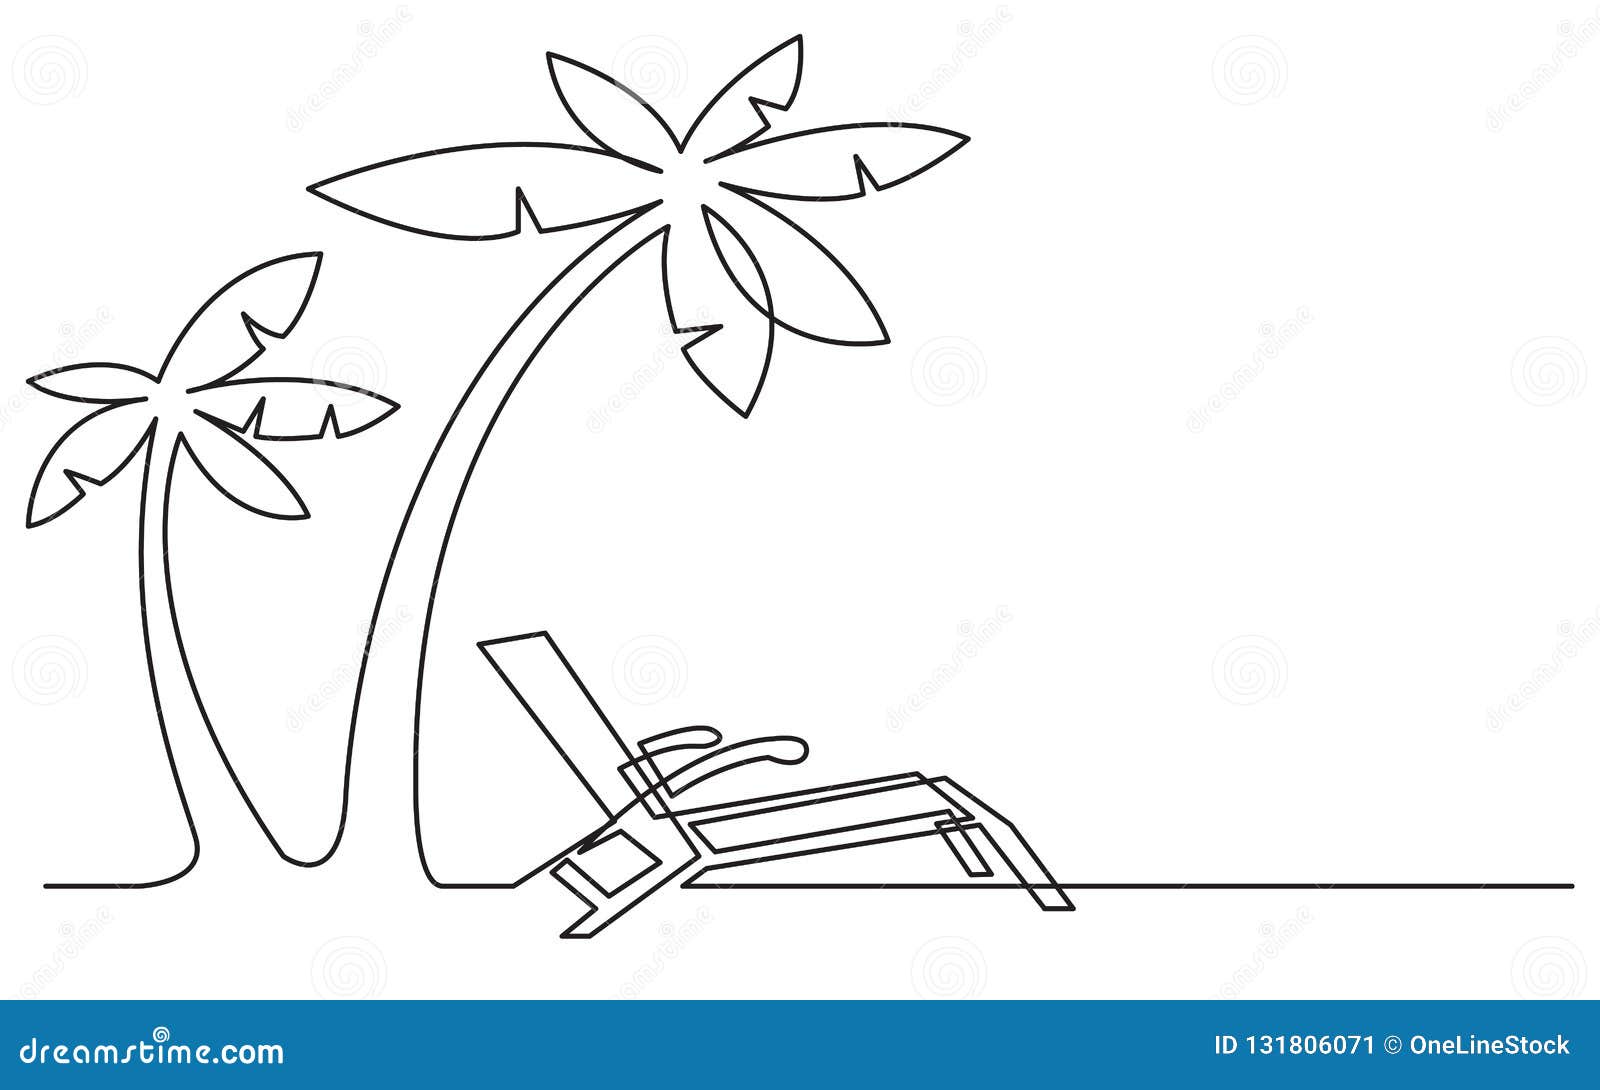 Continuous Line Drawing Of Beach Chair And Palm Trees Stock Vector